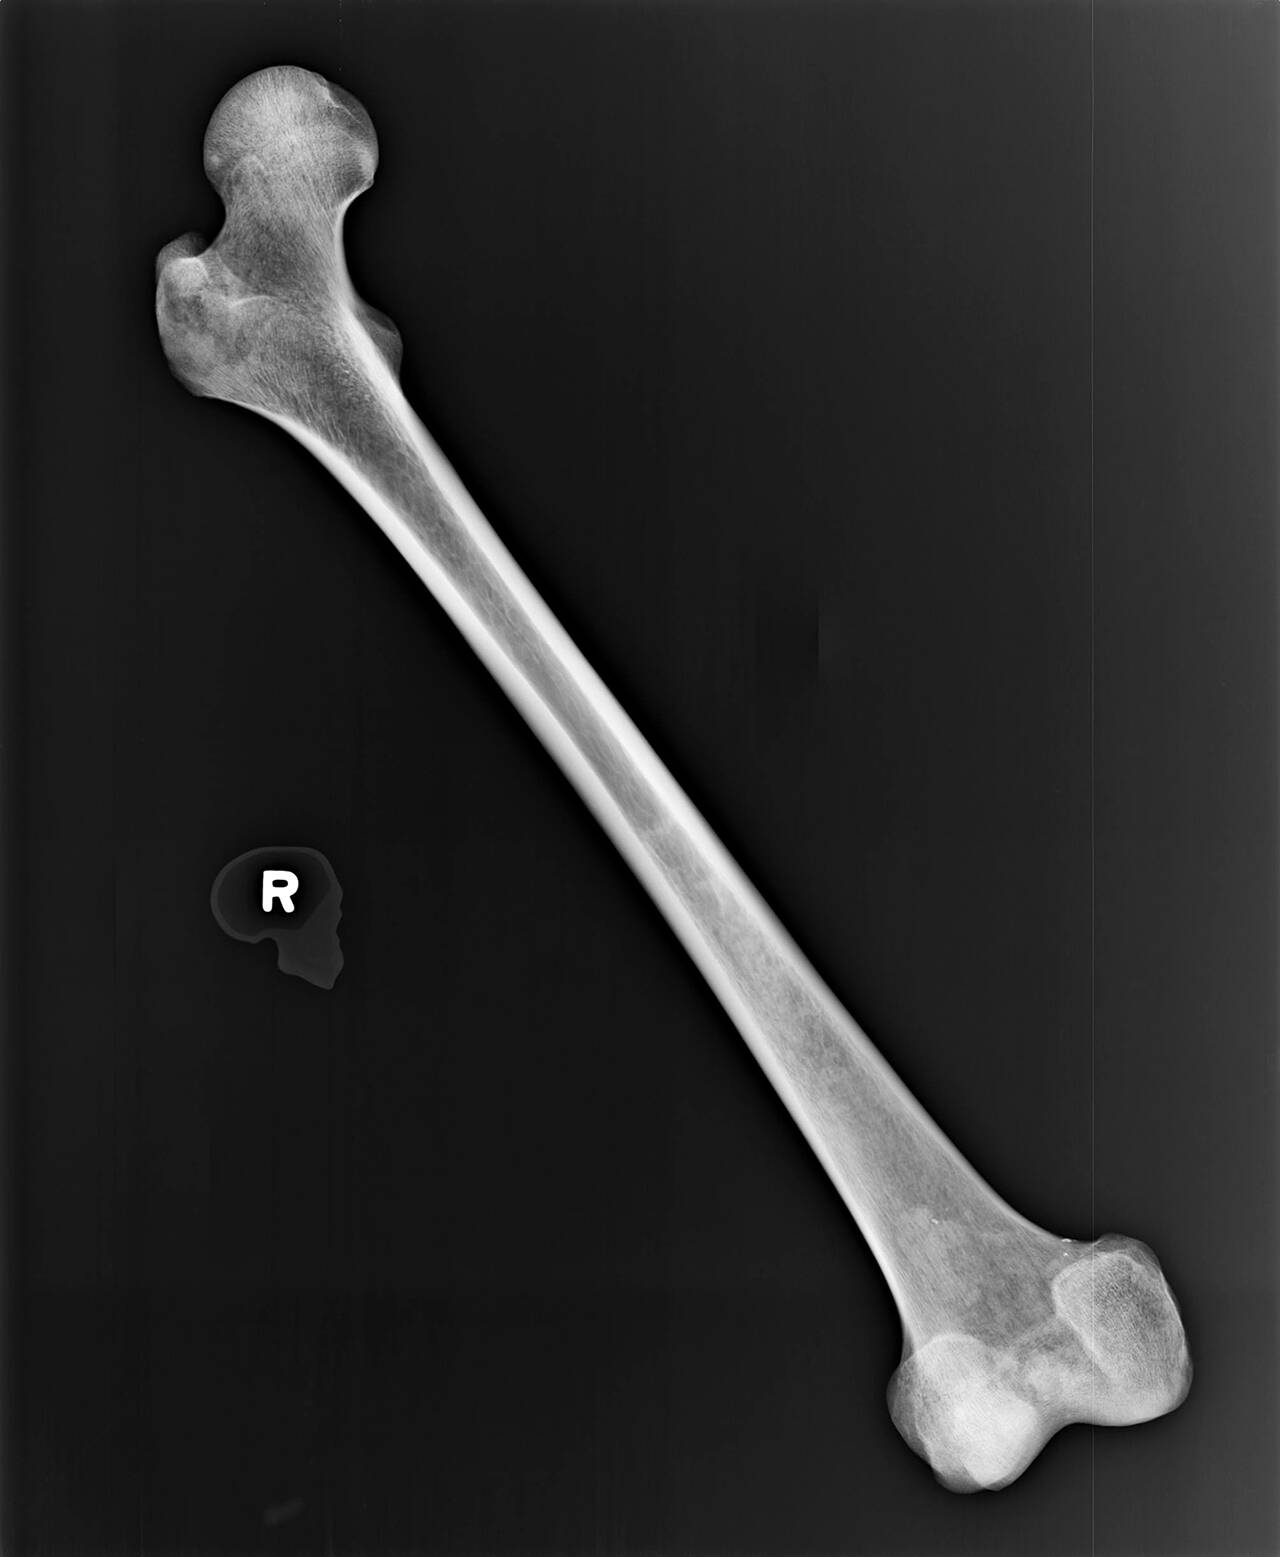 Gary Lee Haynie’s healthy right femur. (Snohomish County Medical Examiner’s Office)